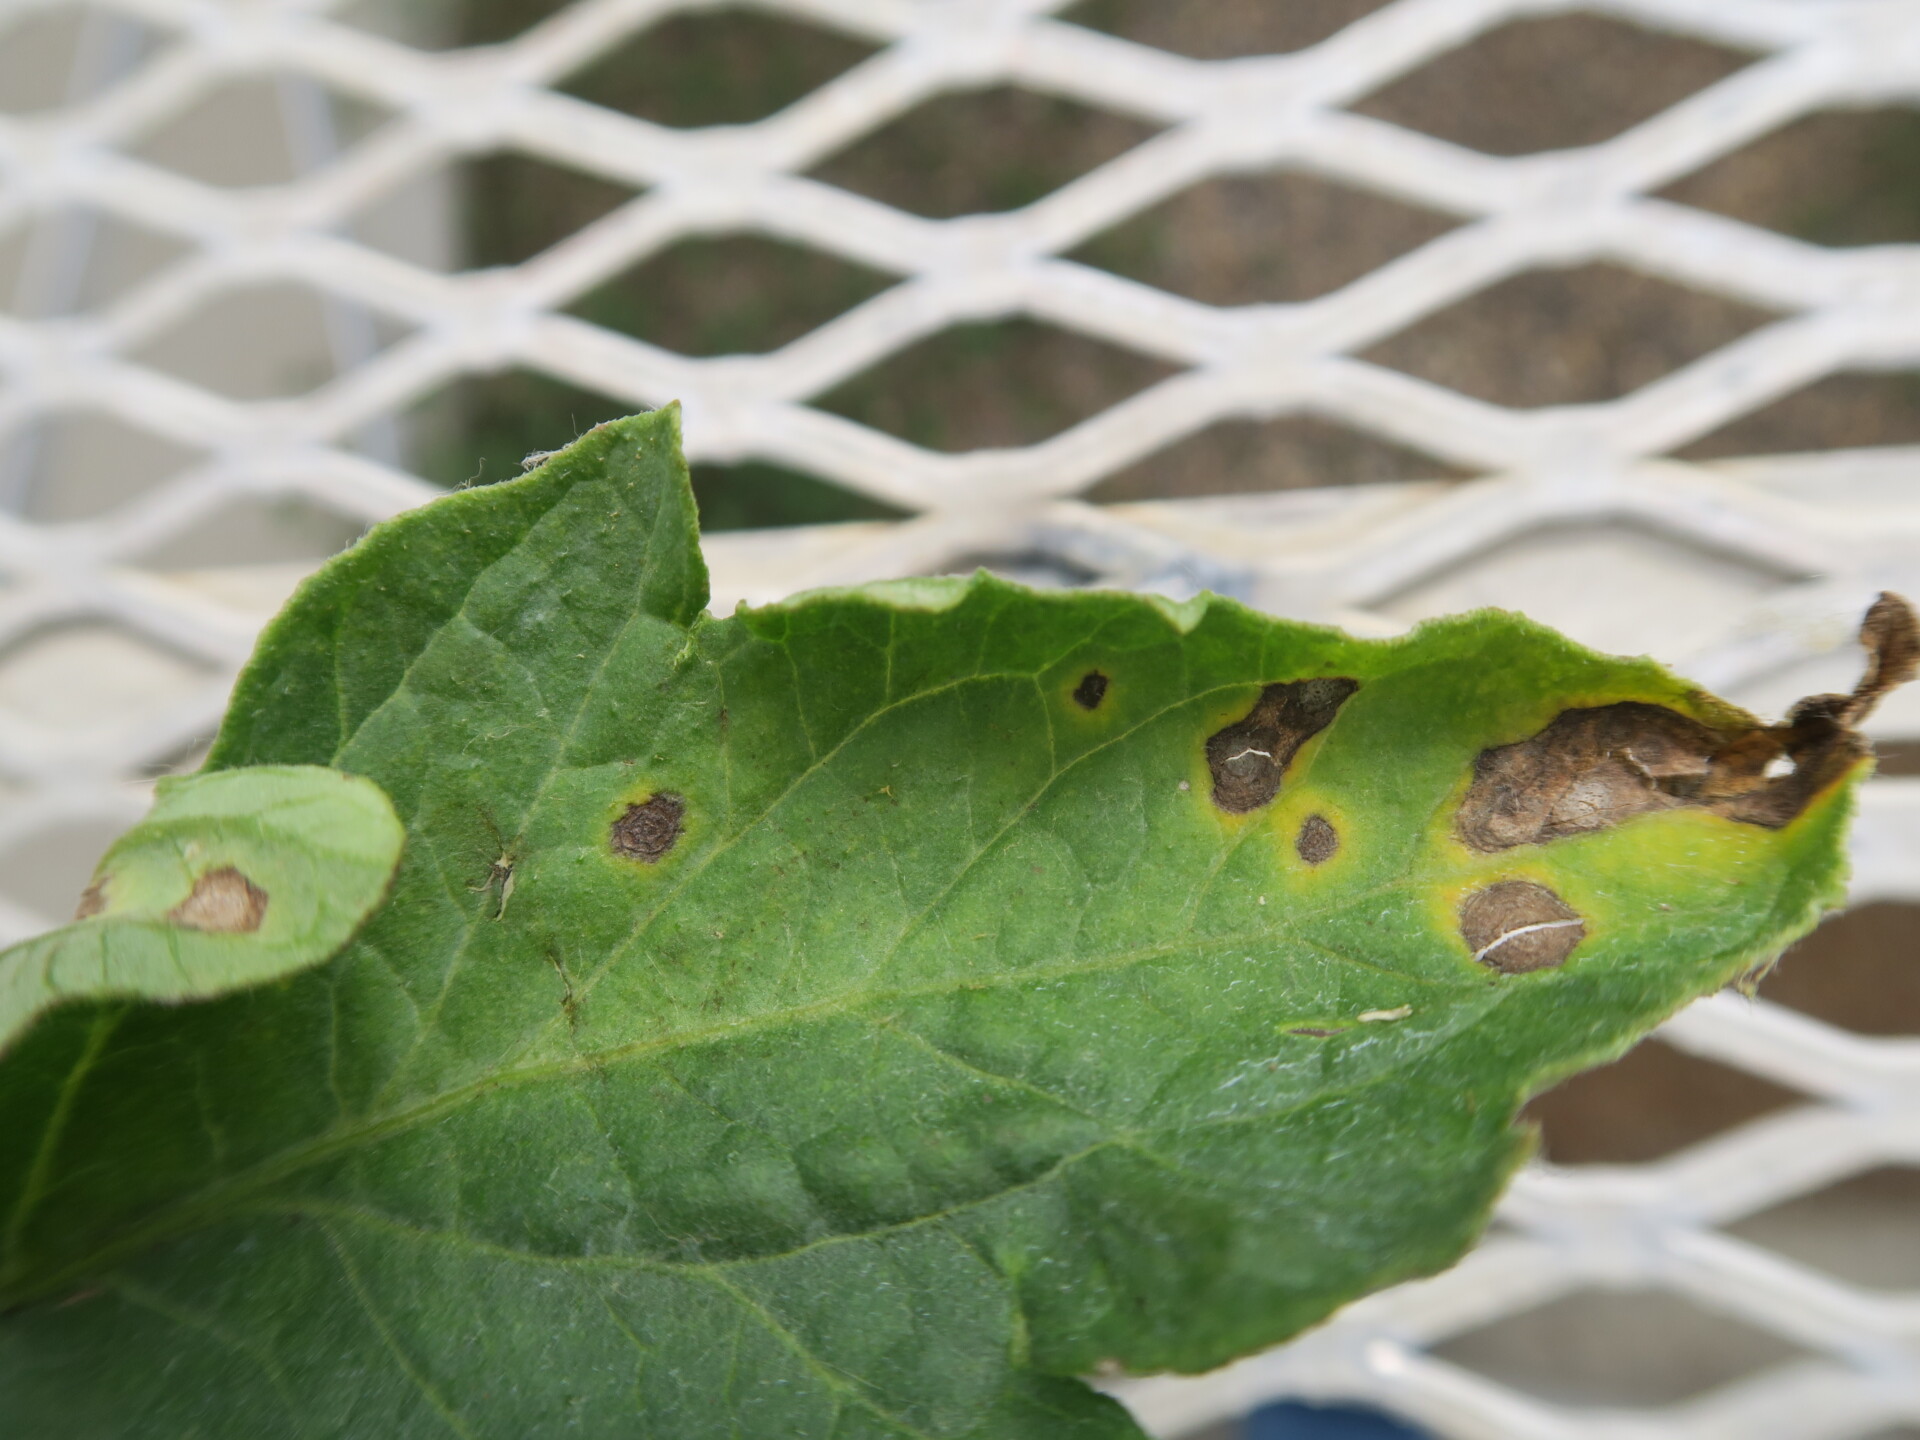 early blight lesions on tomato leaf. Note cracked lesions.